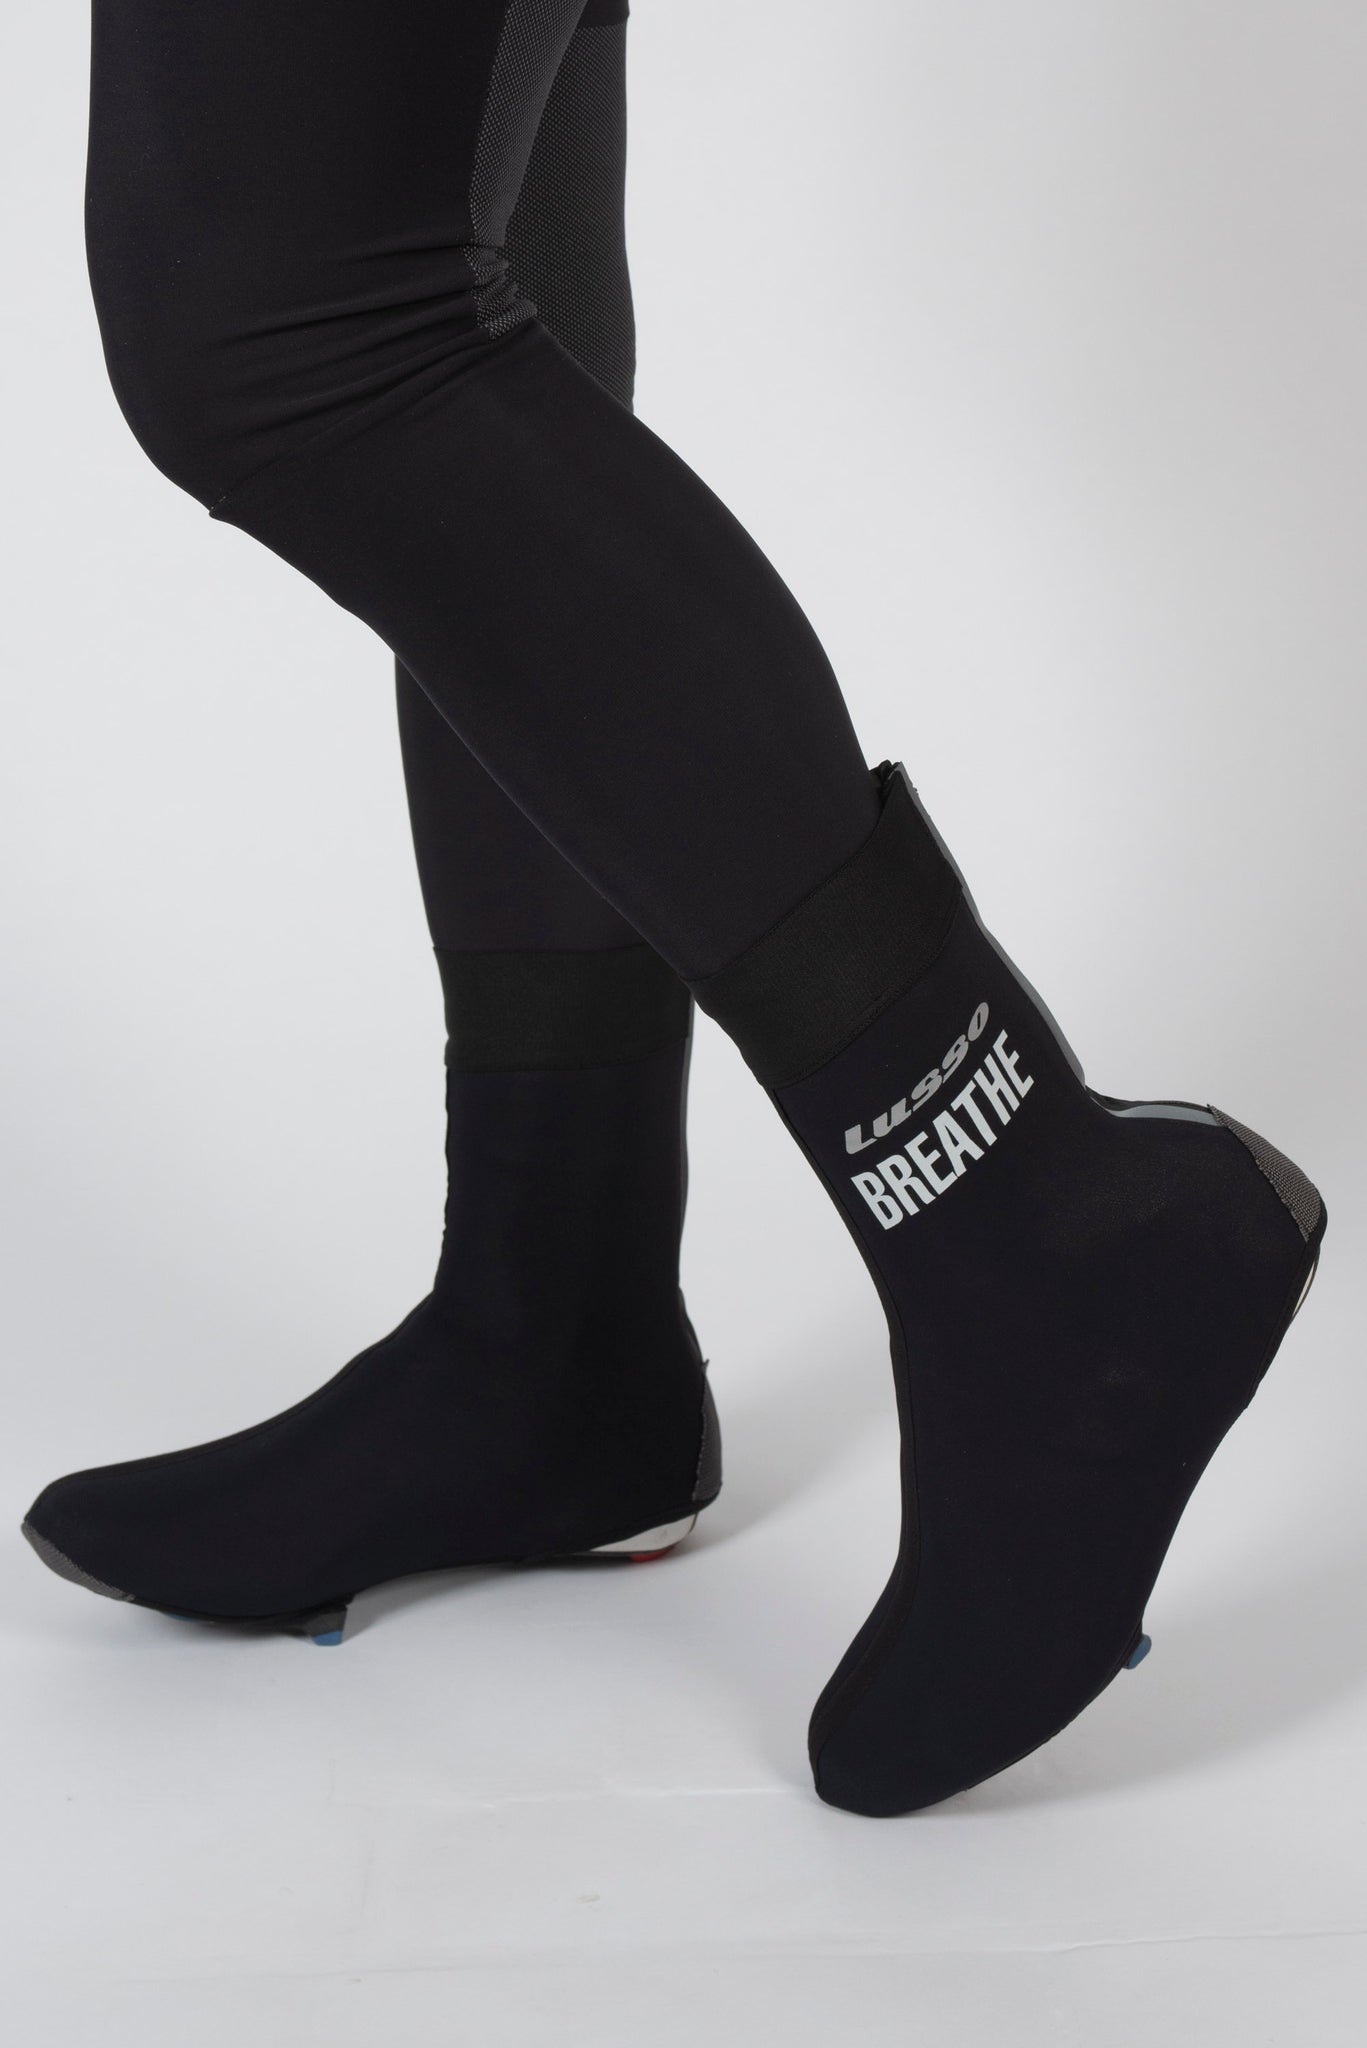 Breathe Overshoes - Lusso Cycle Wear